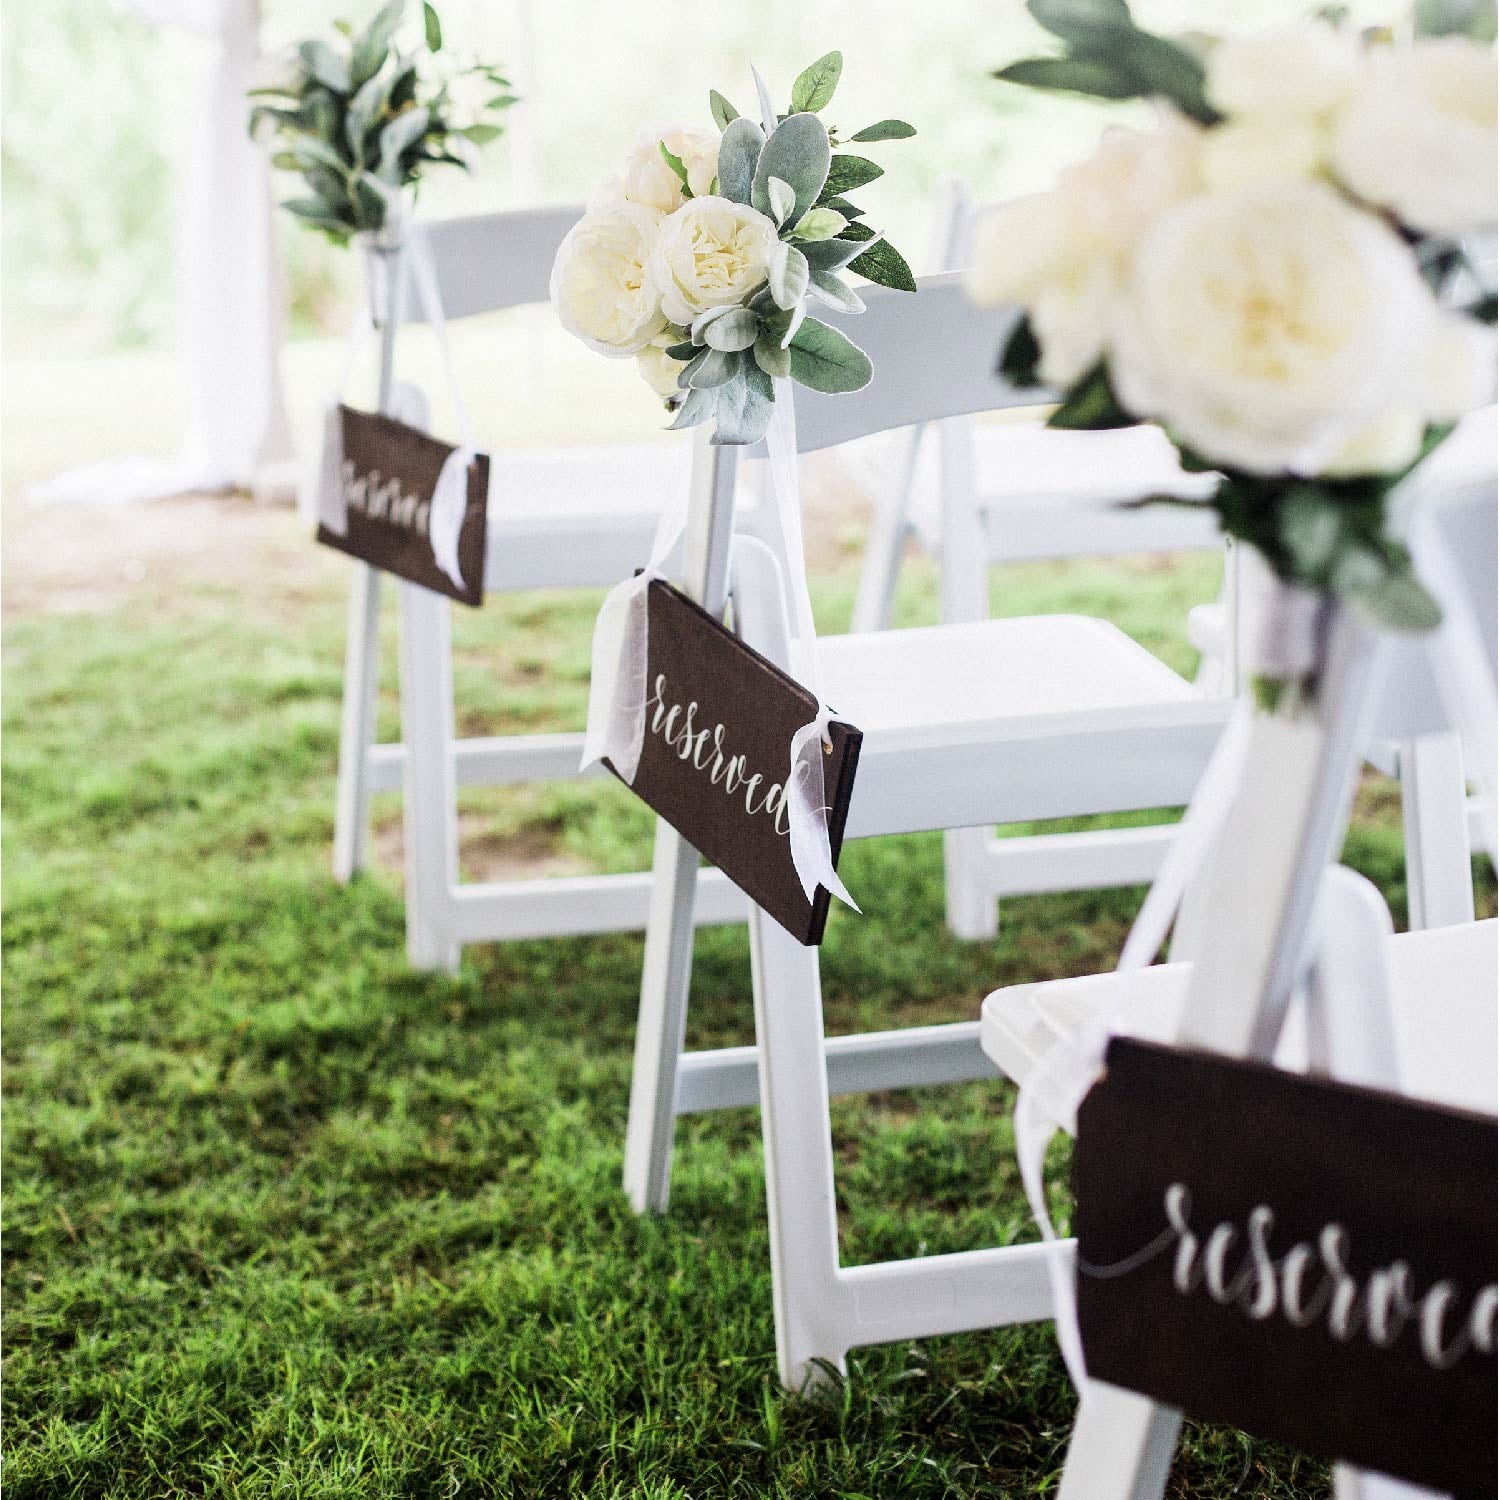 Sign for guests at the wedding FIND YOUR SEAT. Wedding organization.  Wedding background Stock Photo by ©vinigret 398571150